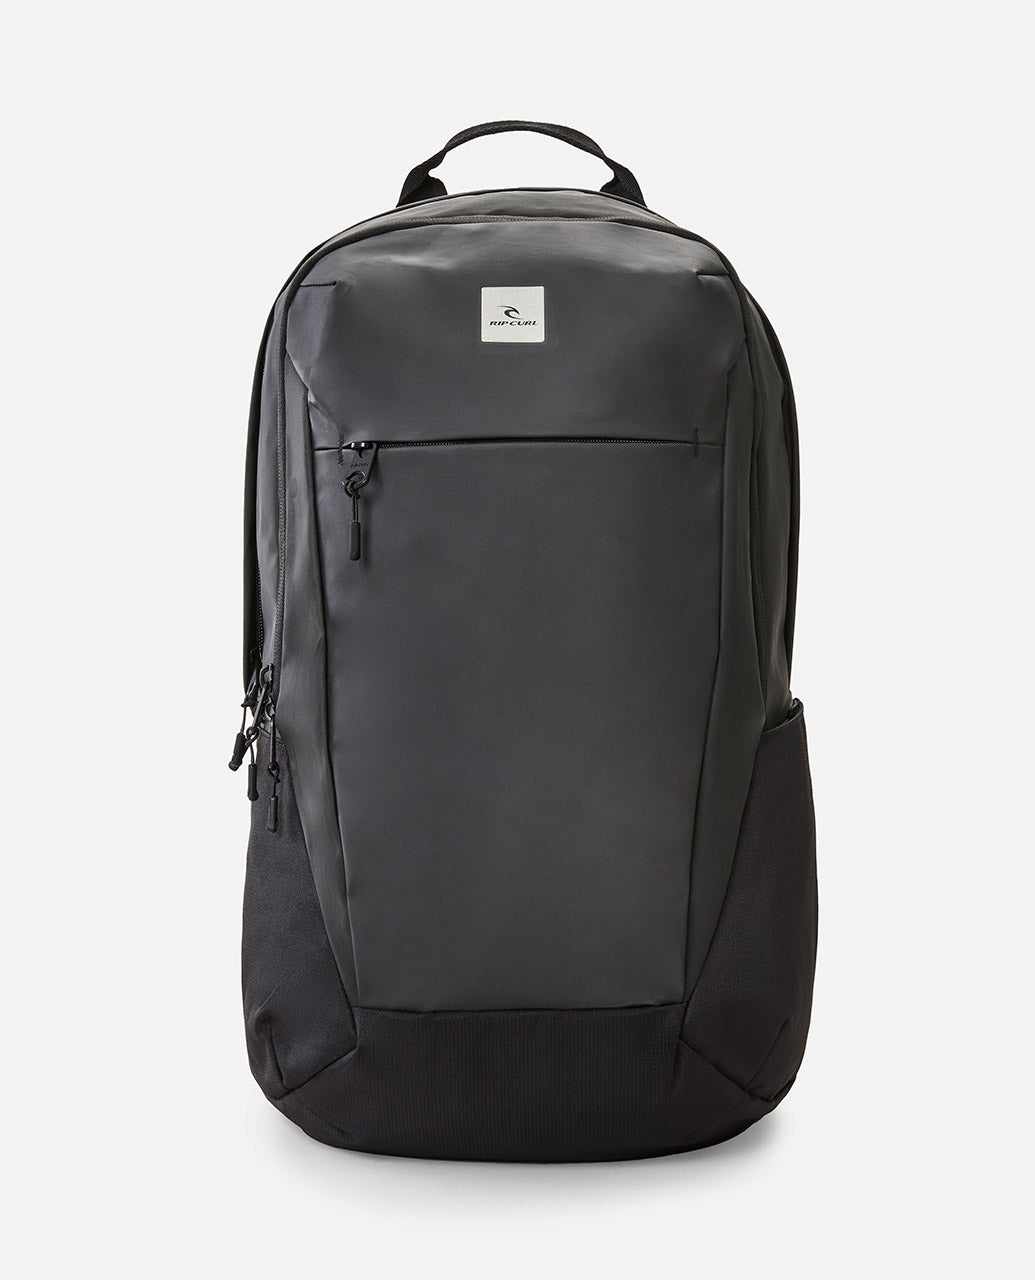 OVERTIME 30L MIDNIGHT – Rip Curl